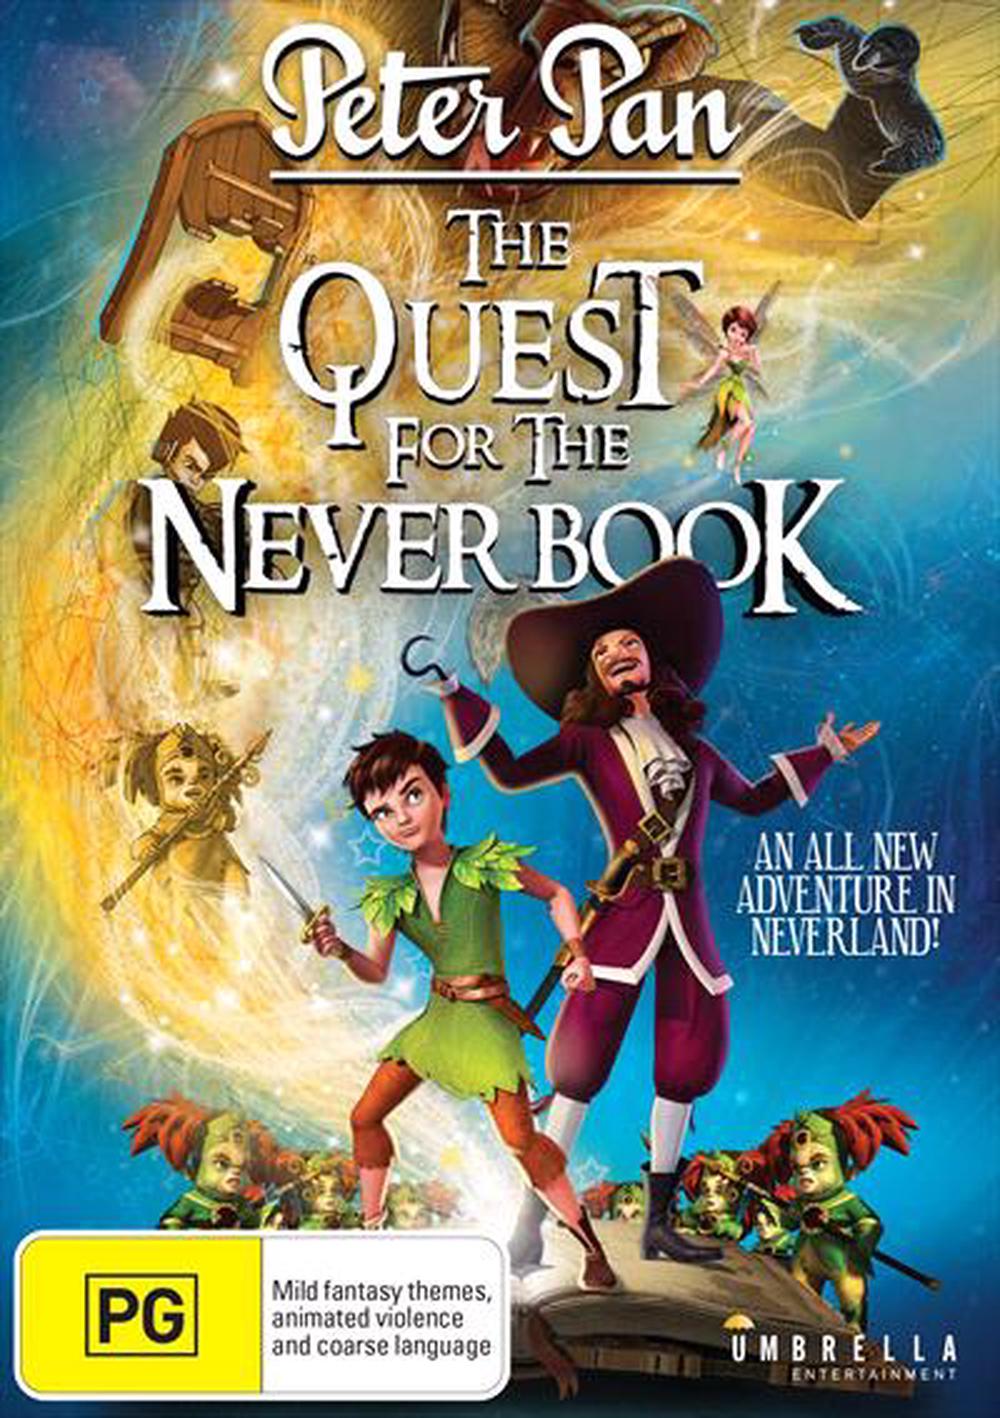 Peter Pan - Quest For The Never Book, The, DVD | Buy online at The Nile